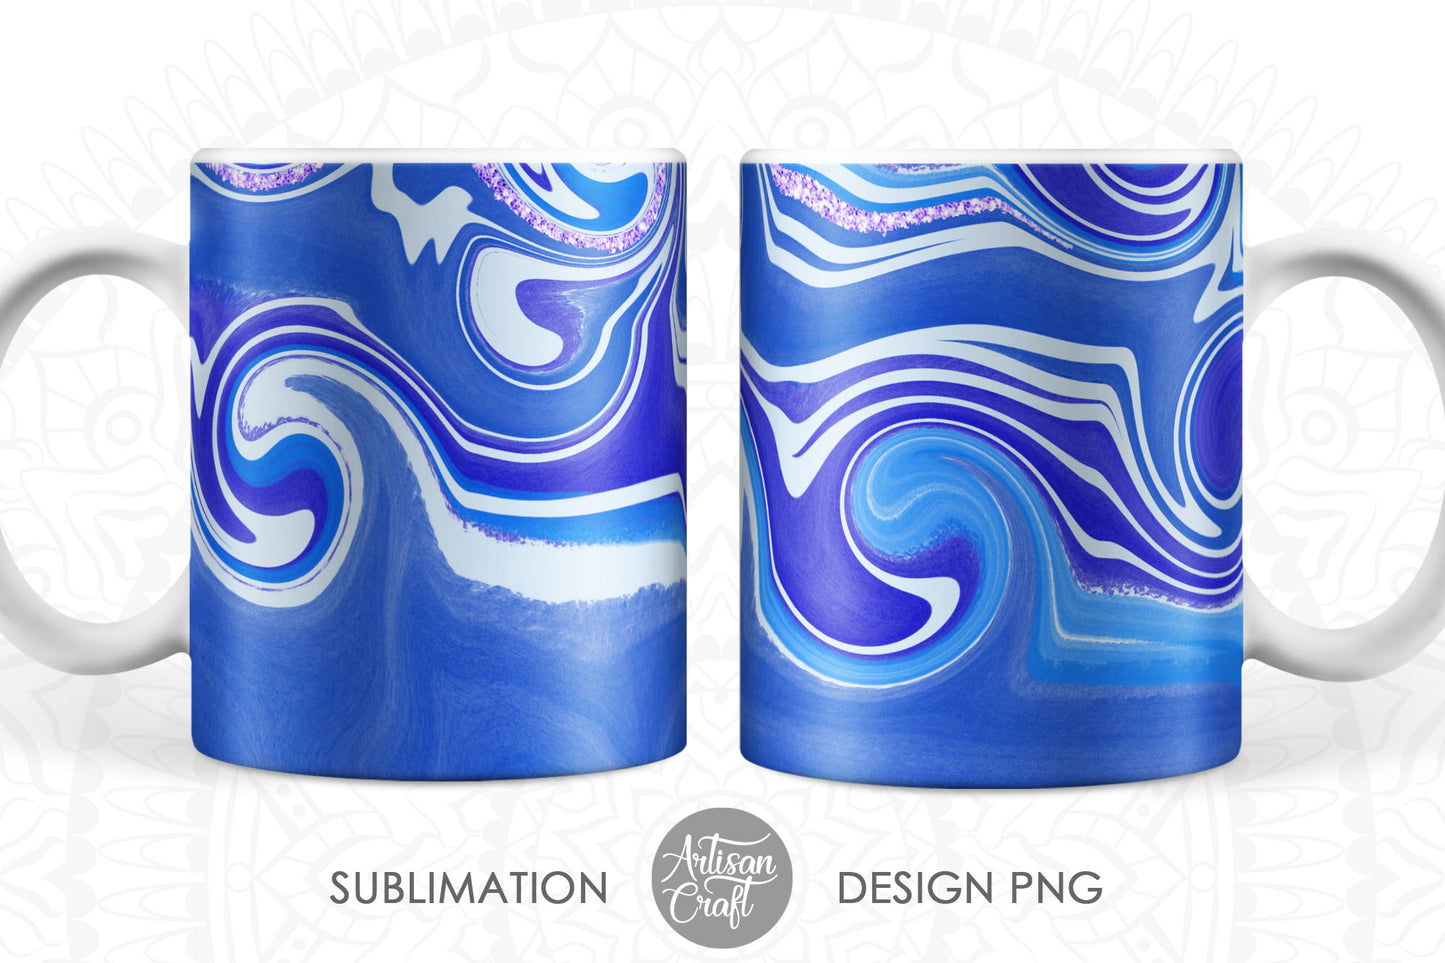 Mug designs PNG for sublimation with blue swirl marble